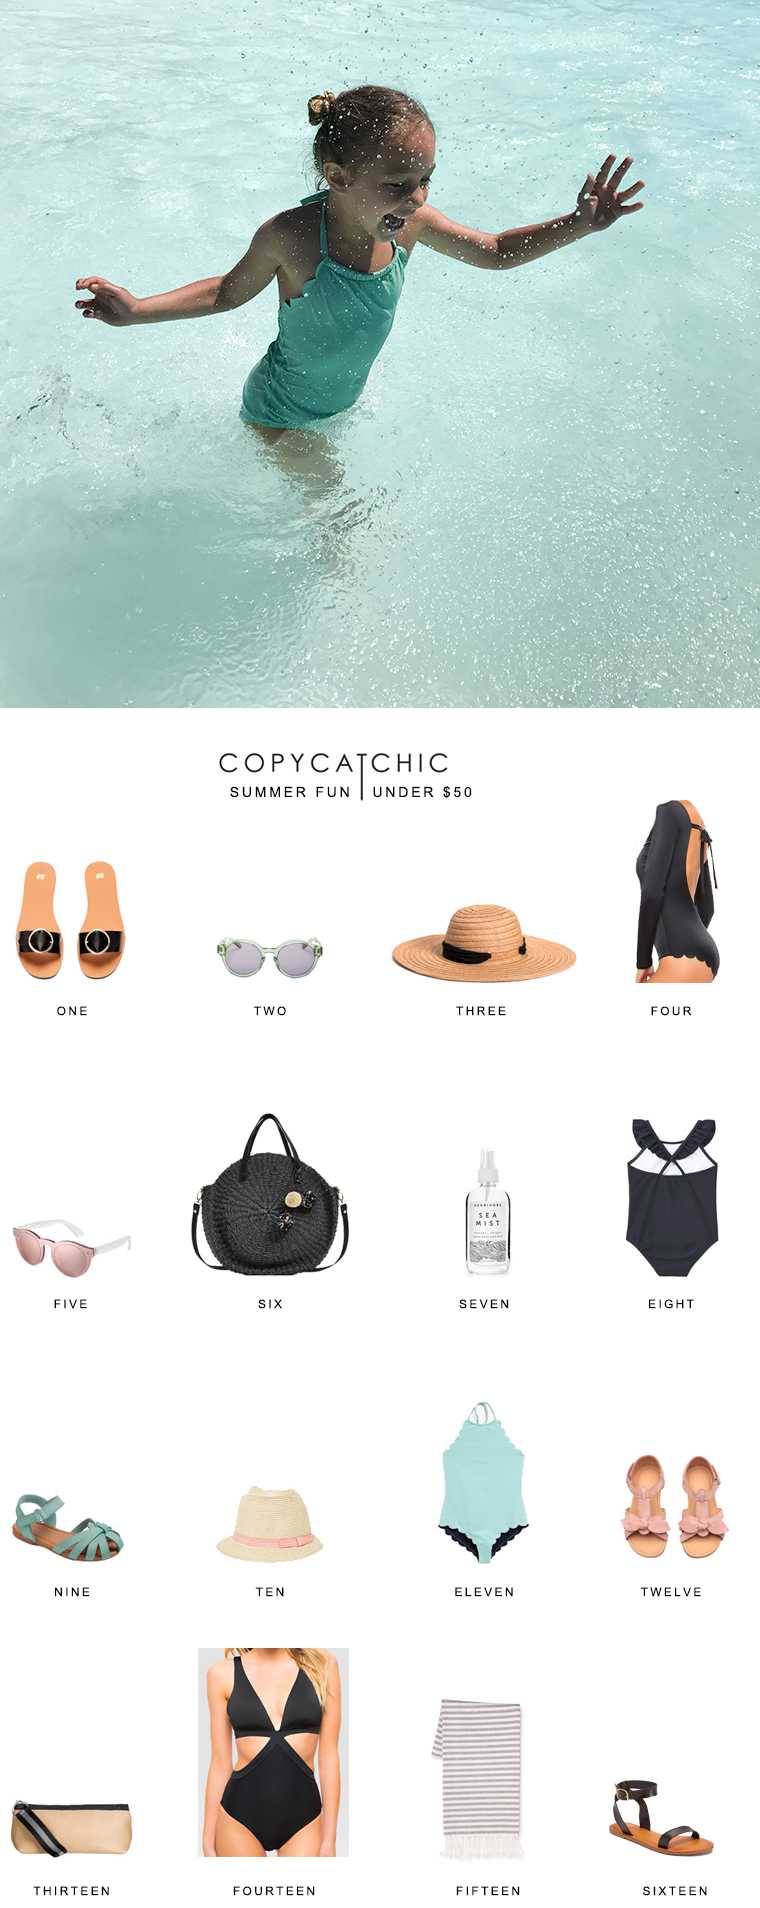 My favorite summer trends for under $50 | great shopping list for summer fashion steals on a budget | copycatchic luxe living for less | Raging Waters San Jose #RagingWatersSJ